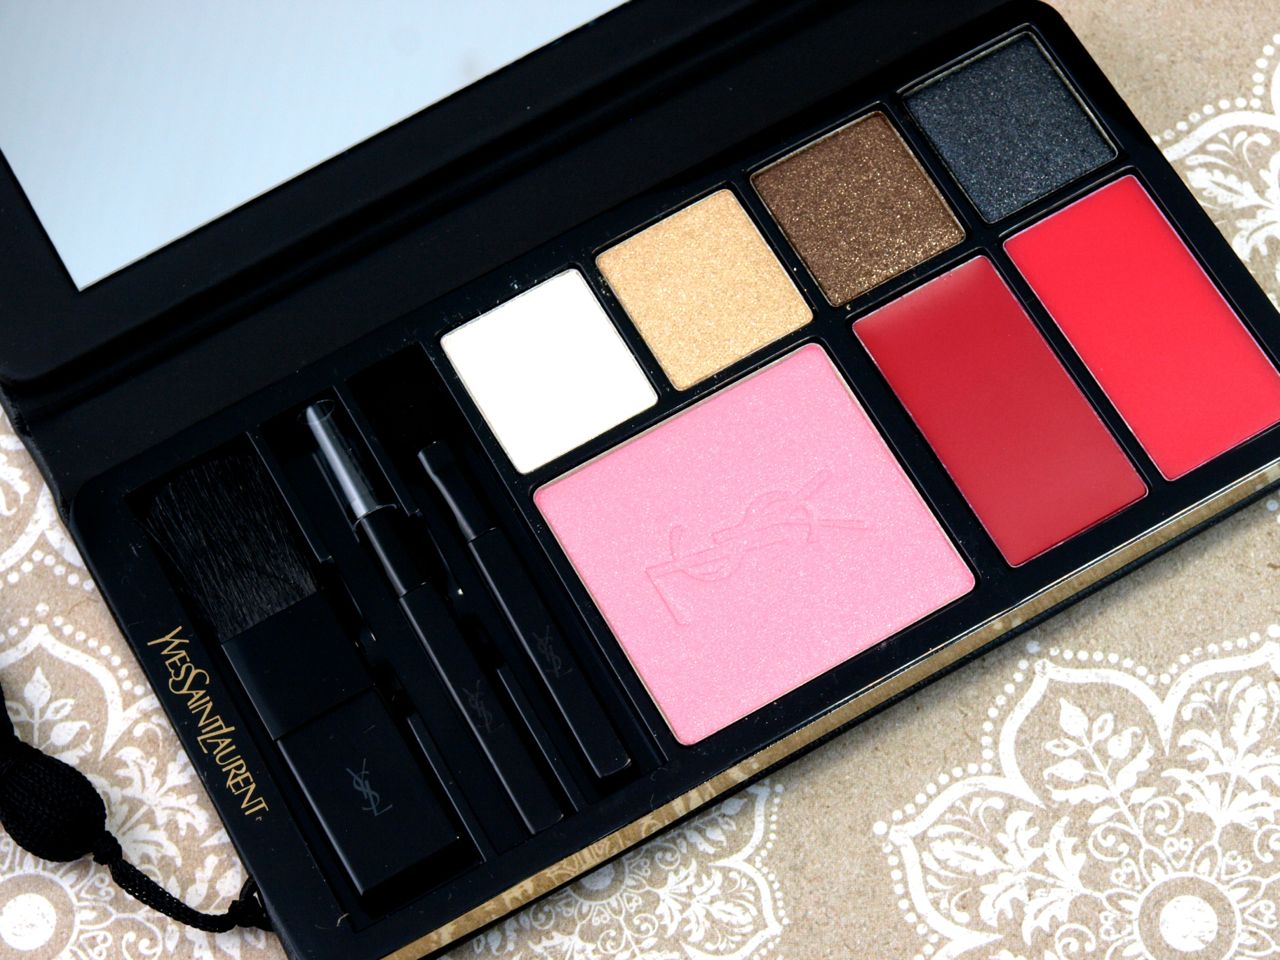 Modstand Havanemone firkant Yves Saint Laurent YSL Holiday 2014 Wildly Gold Complete Makeup Palette:  Review and Swatches | The Happy Sloths: Beauty, Makeup, and Skincare Blog  with Reviews and Swatches